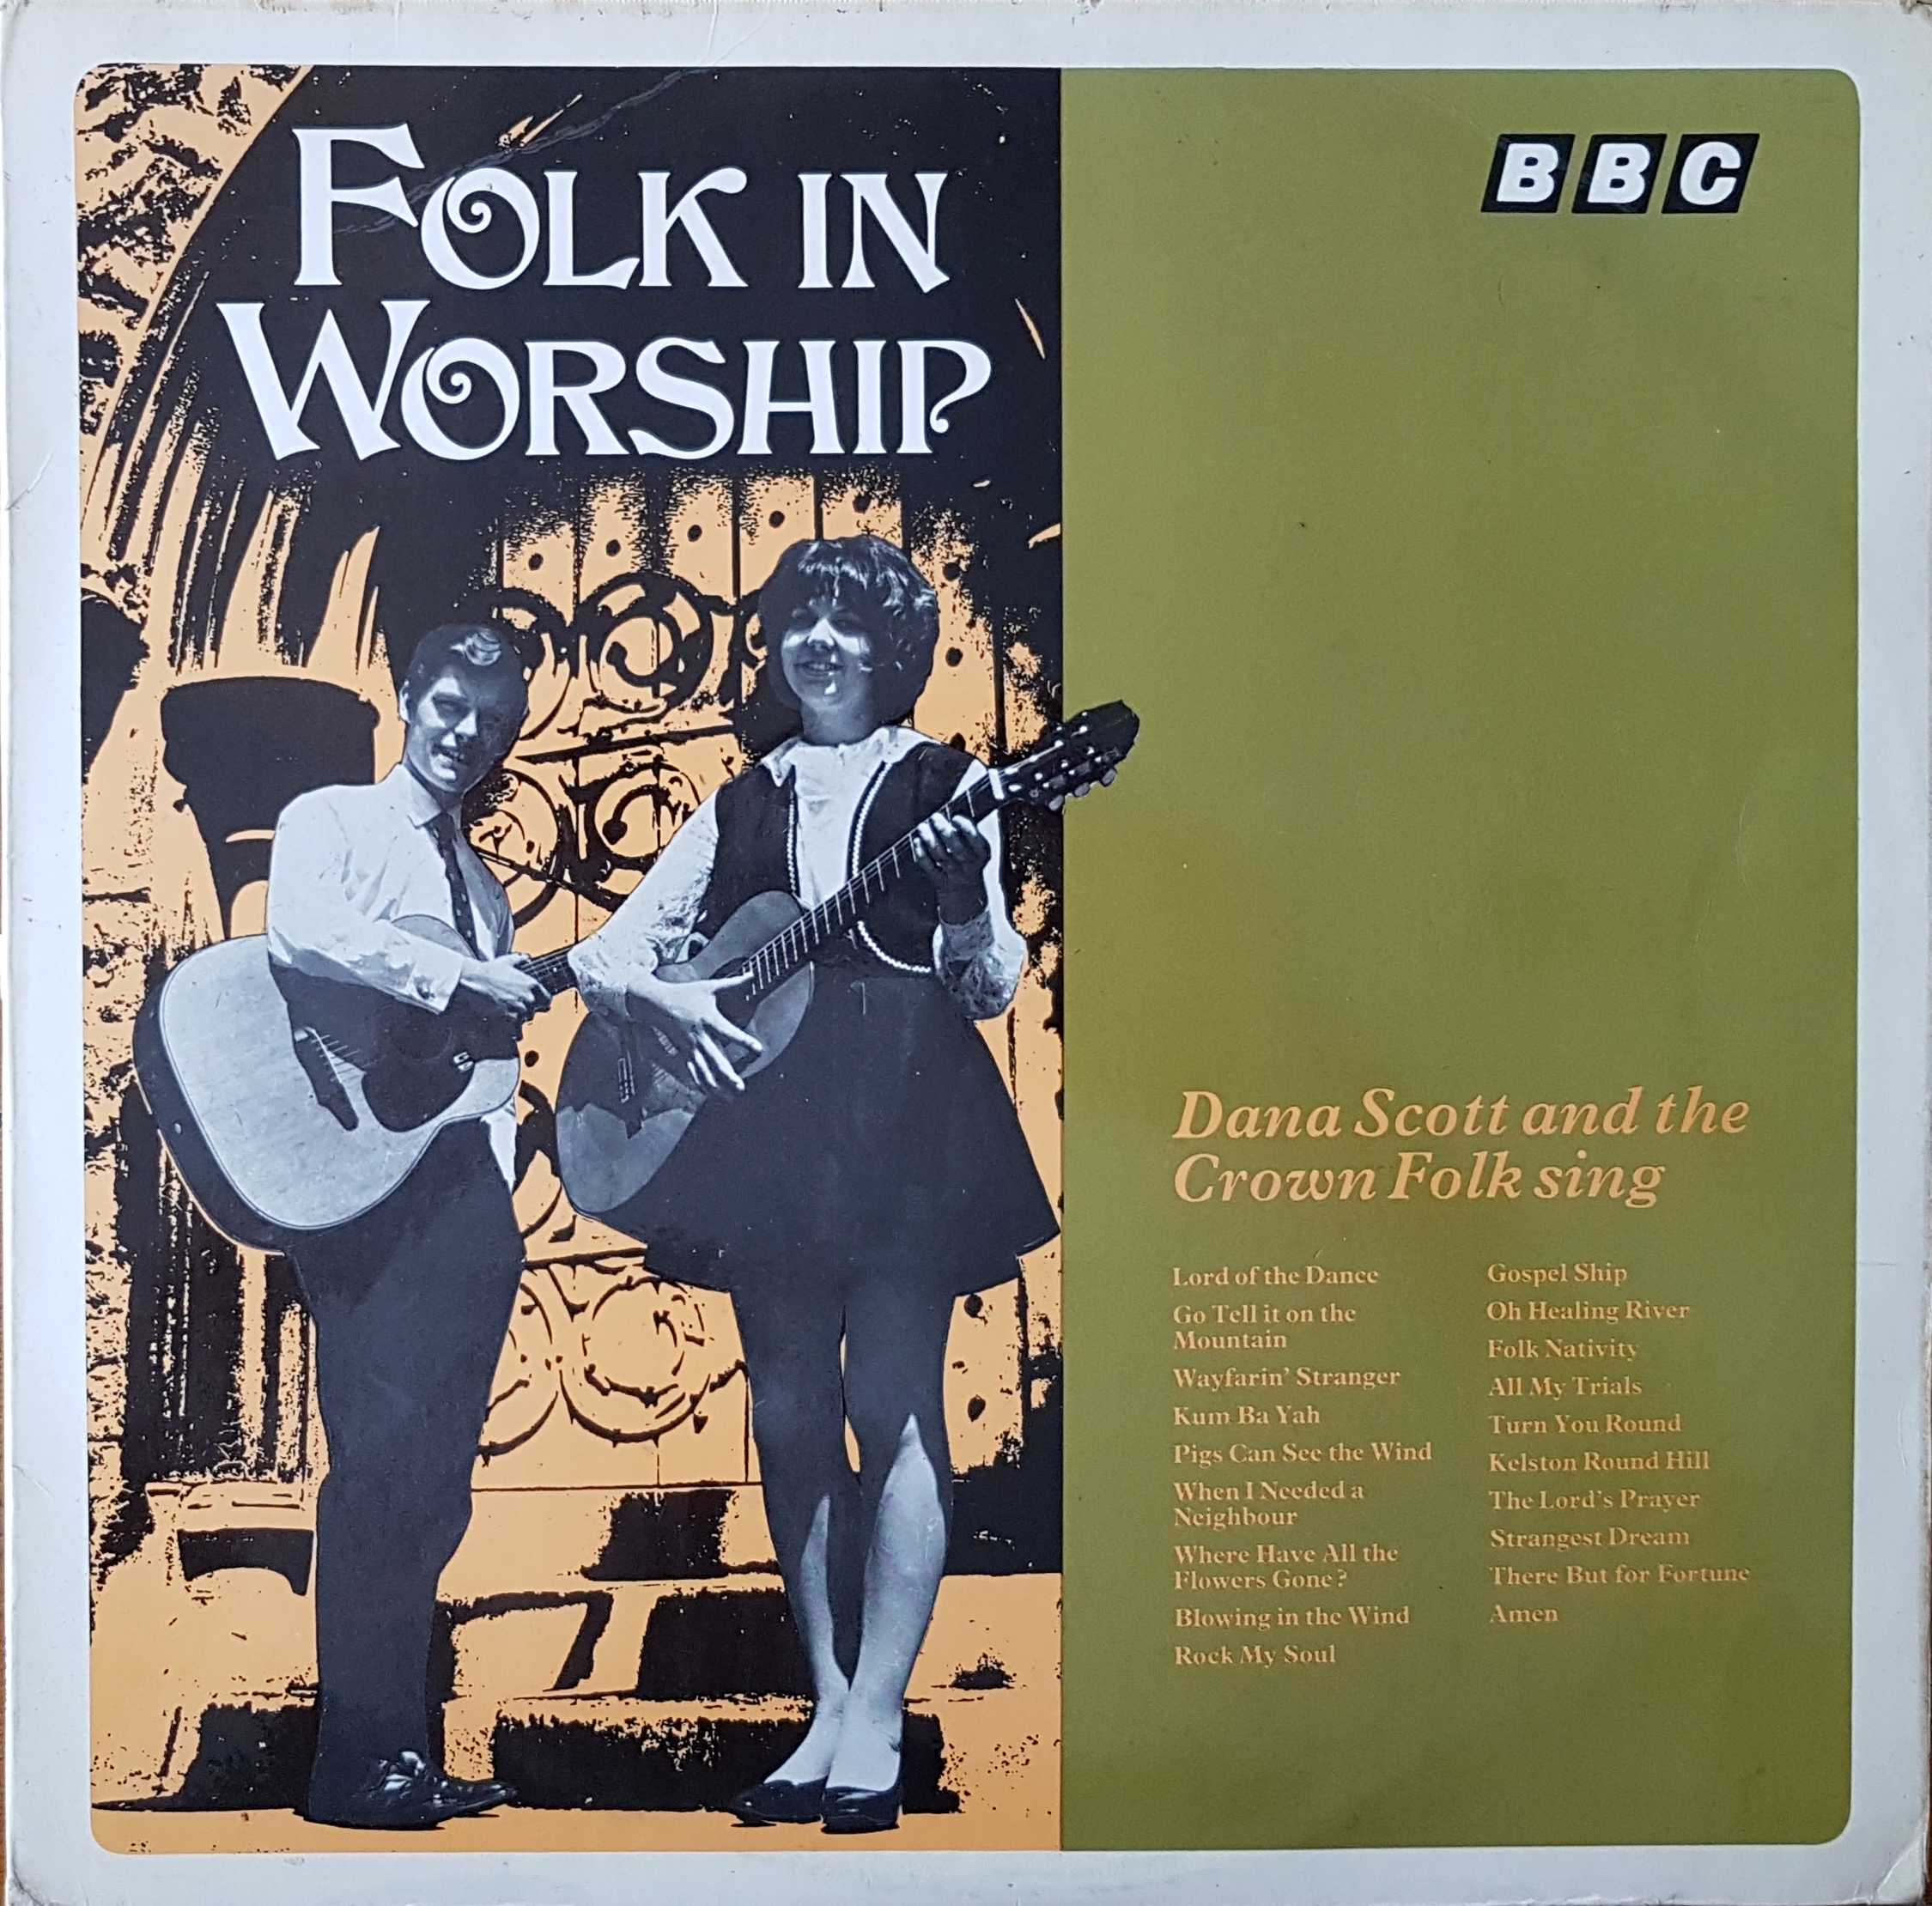 Picture of REC 58 Folk in Worship by artist Various from the BBC records and Tapes library